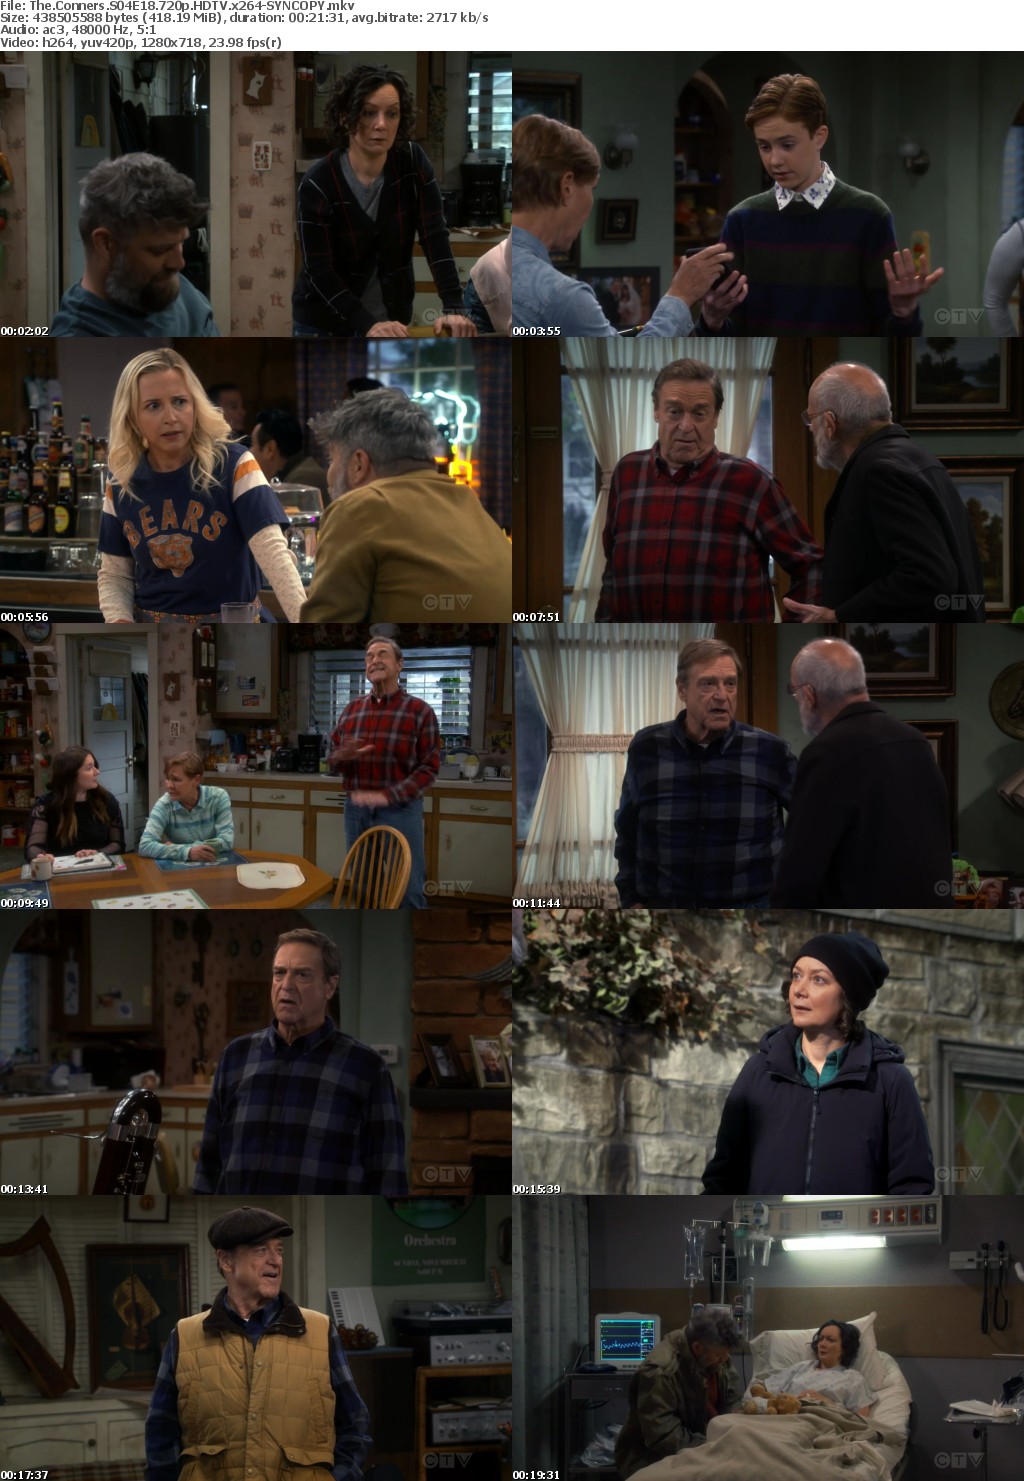 The Conners S04E18 720p HDTV x264-SYNCOPY